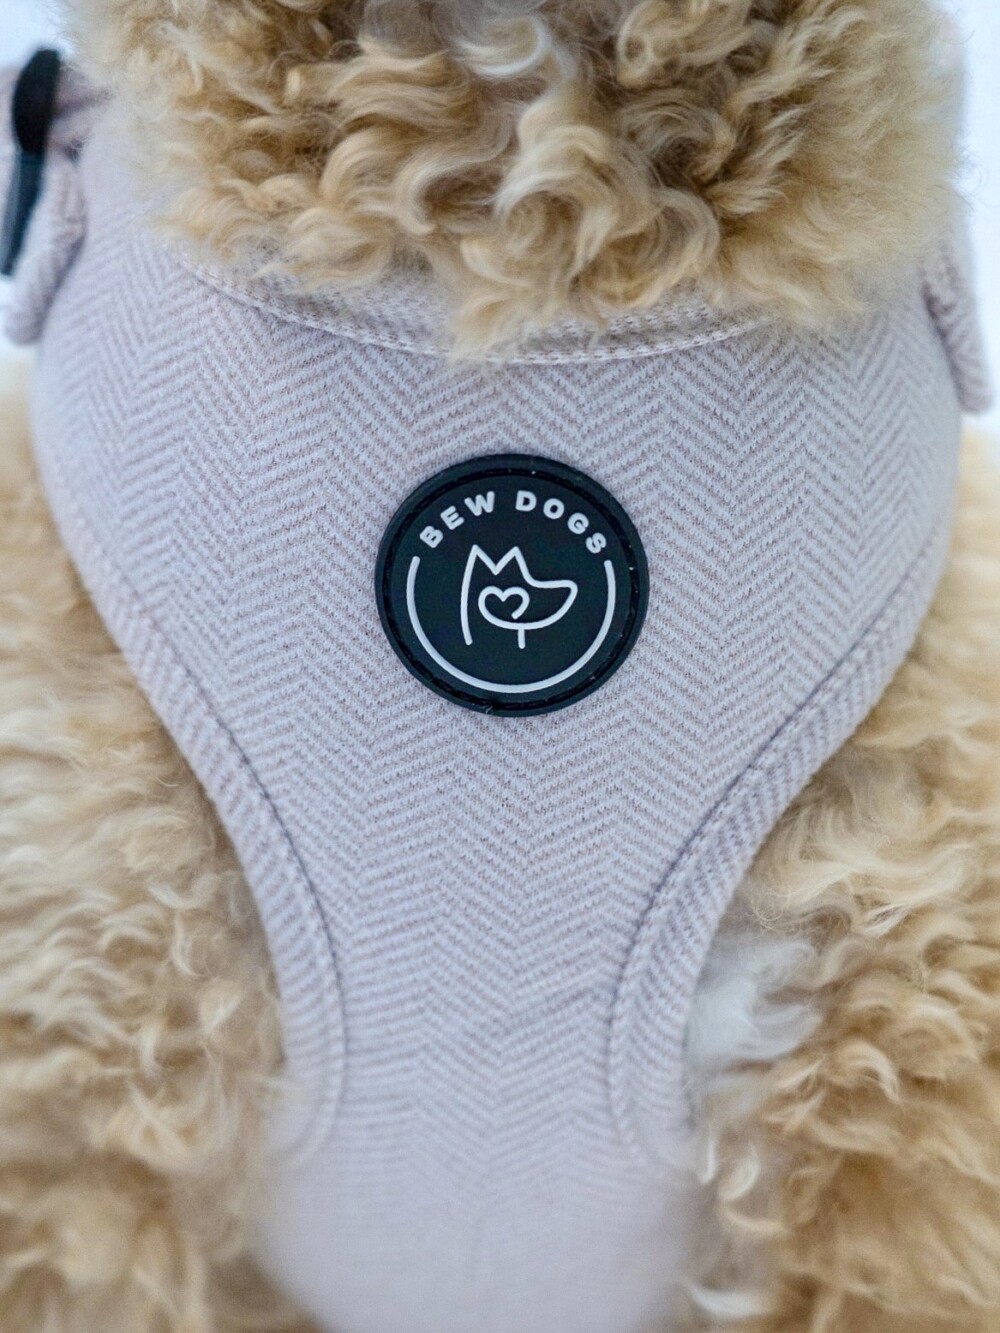 a close up of a lilac herringbone patterned harness on a grey and white dog, with a black branding logo.